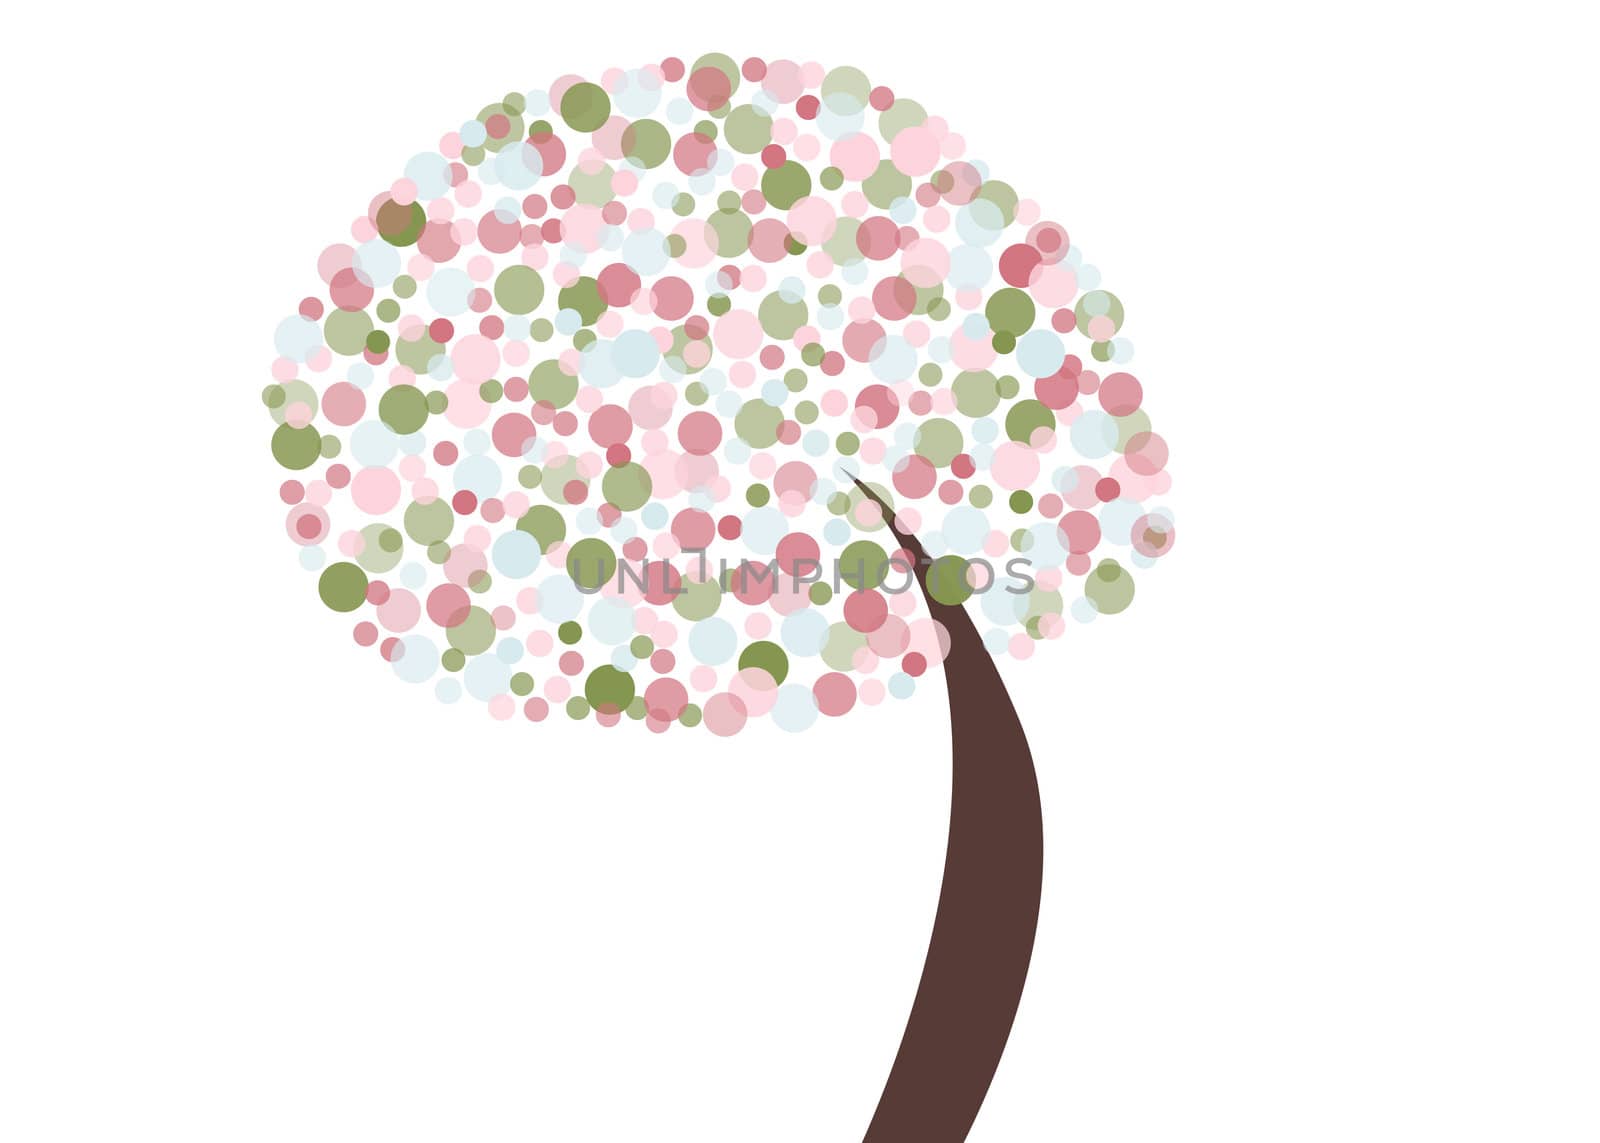 Abstract tree with pastel circles with retro feel